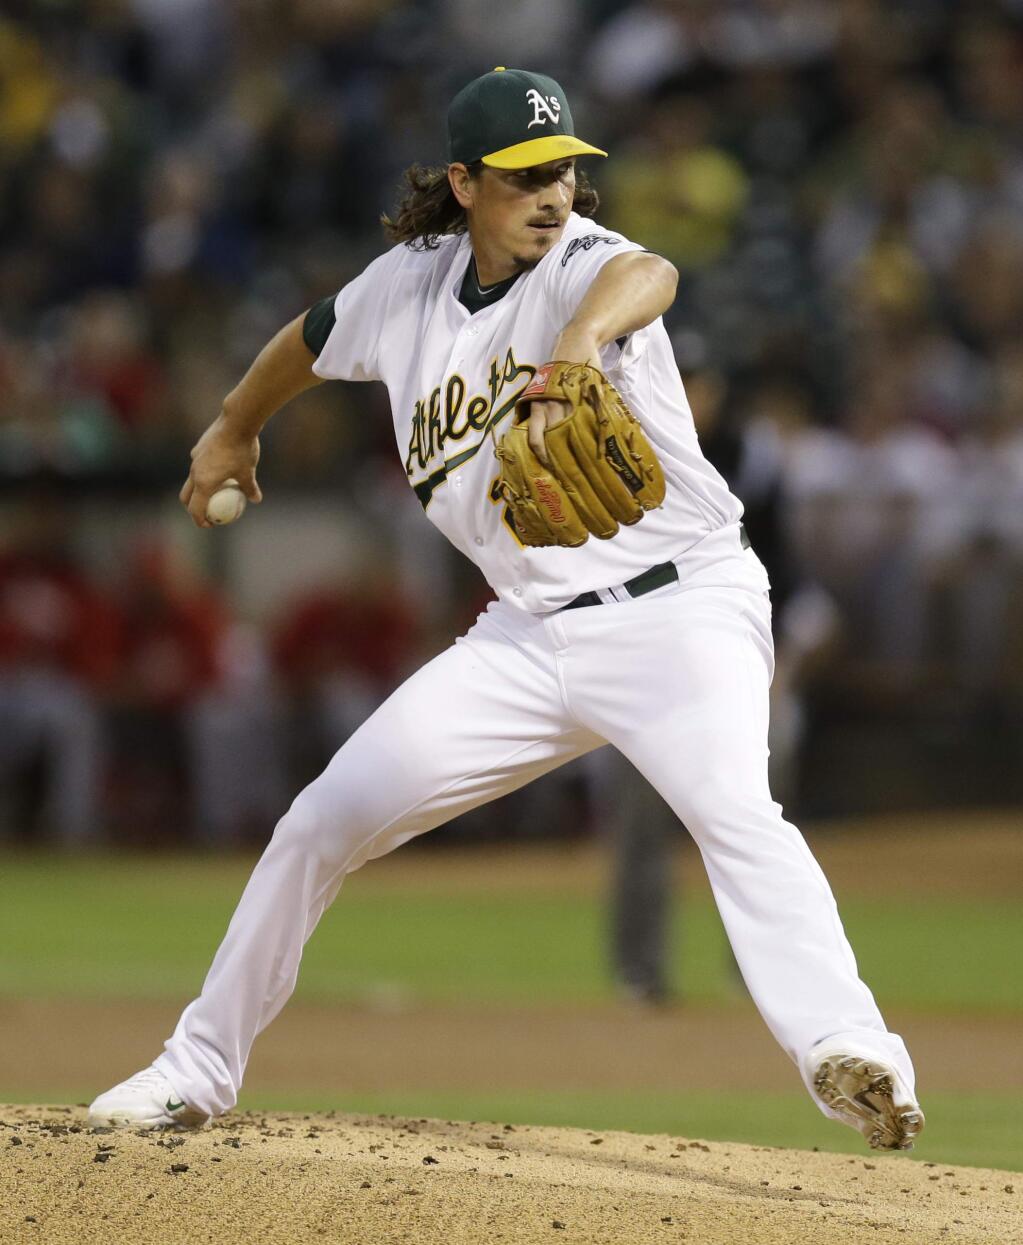 Oakland Athletics' Jeff Samardzija works against the Los Angeles Angels in the first inning of a baseball game Monday, Sept. 22, 2014, in Oakland, Calif. (AP Photo/Ben Margot)